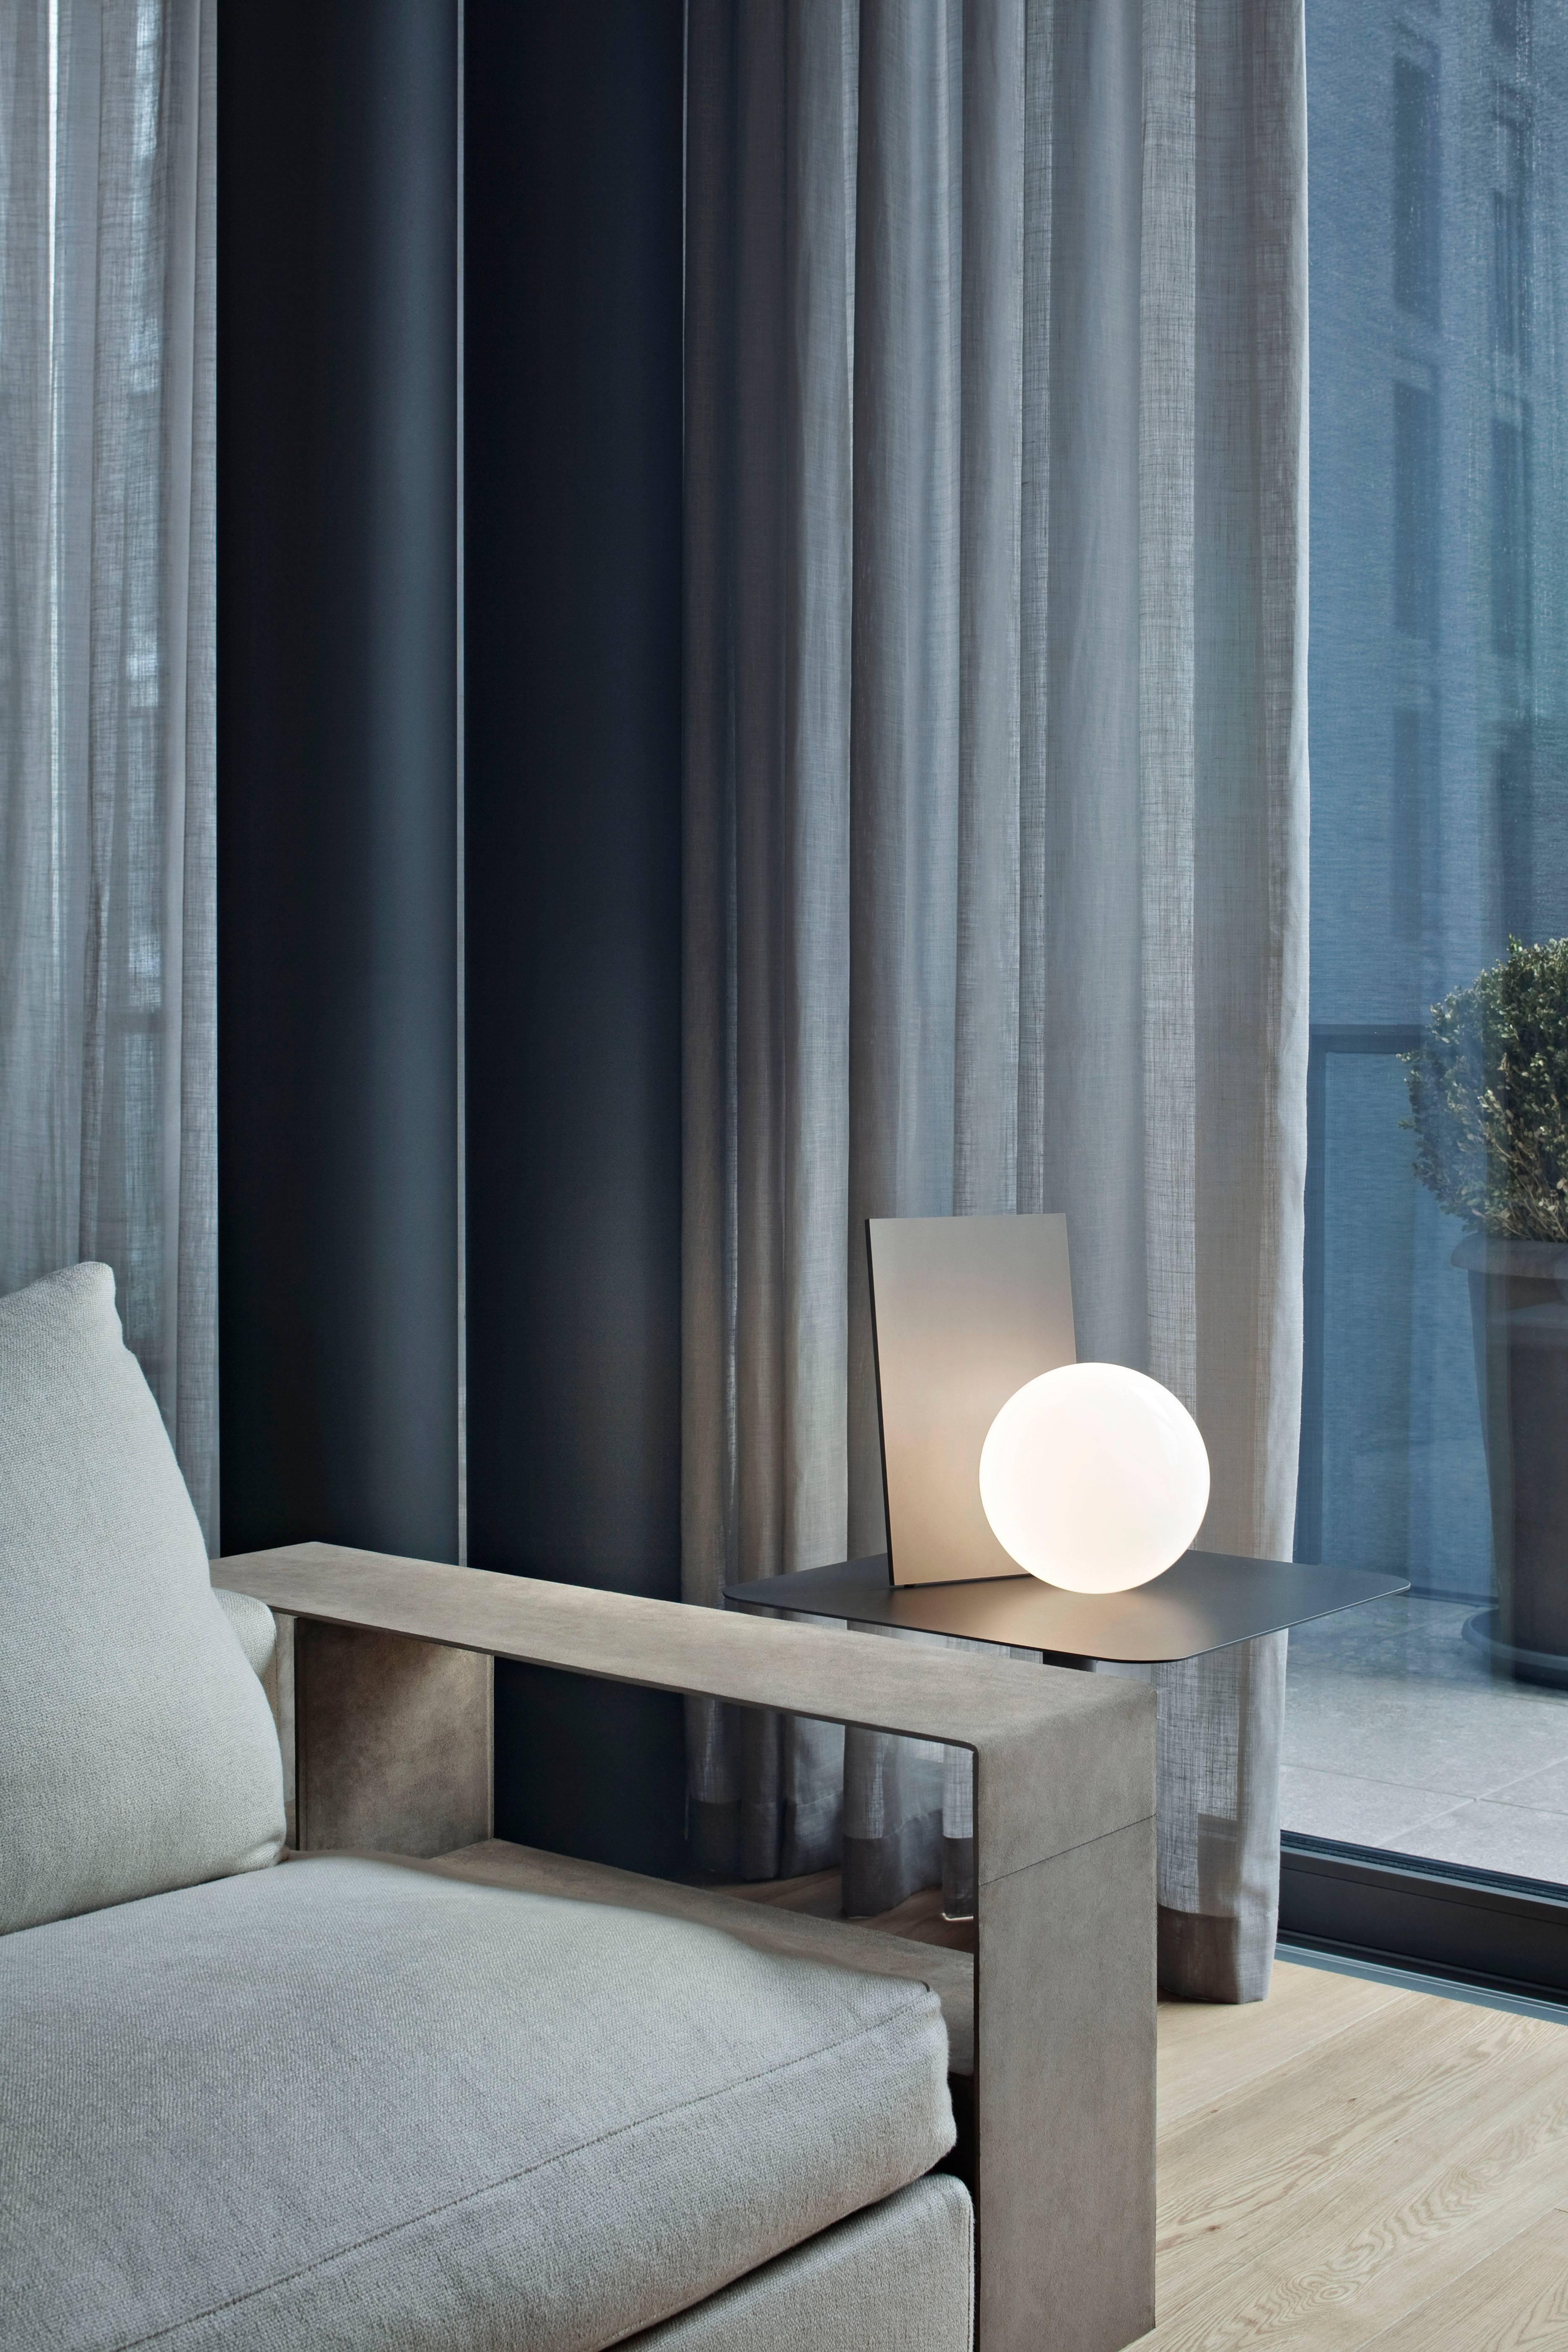 Italian FLOS Extra T Anodized Table Lamp in Graphite by Michael Anastassiades